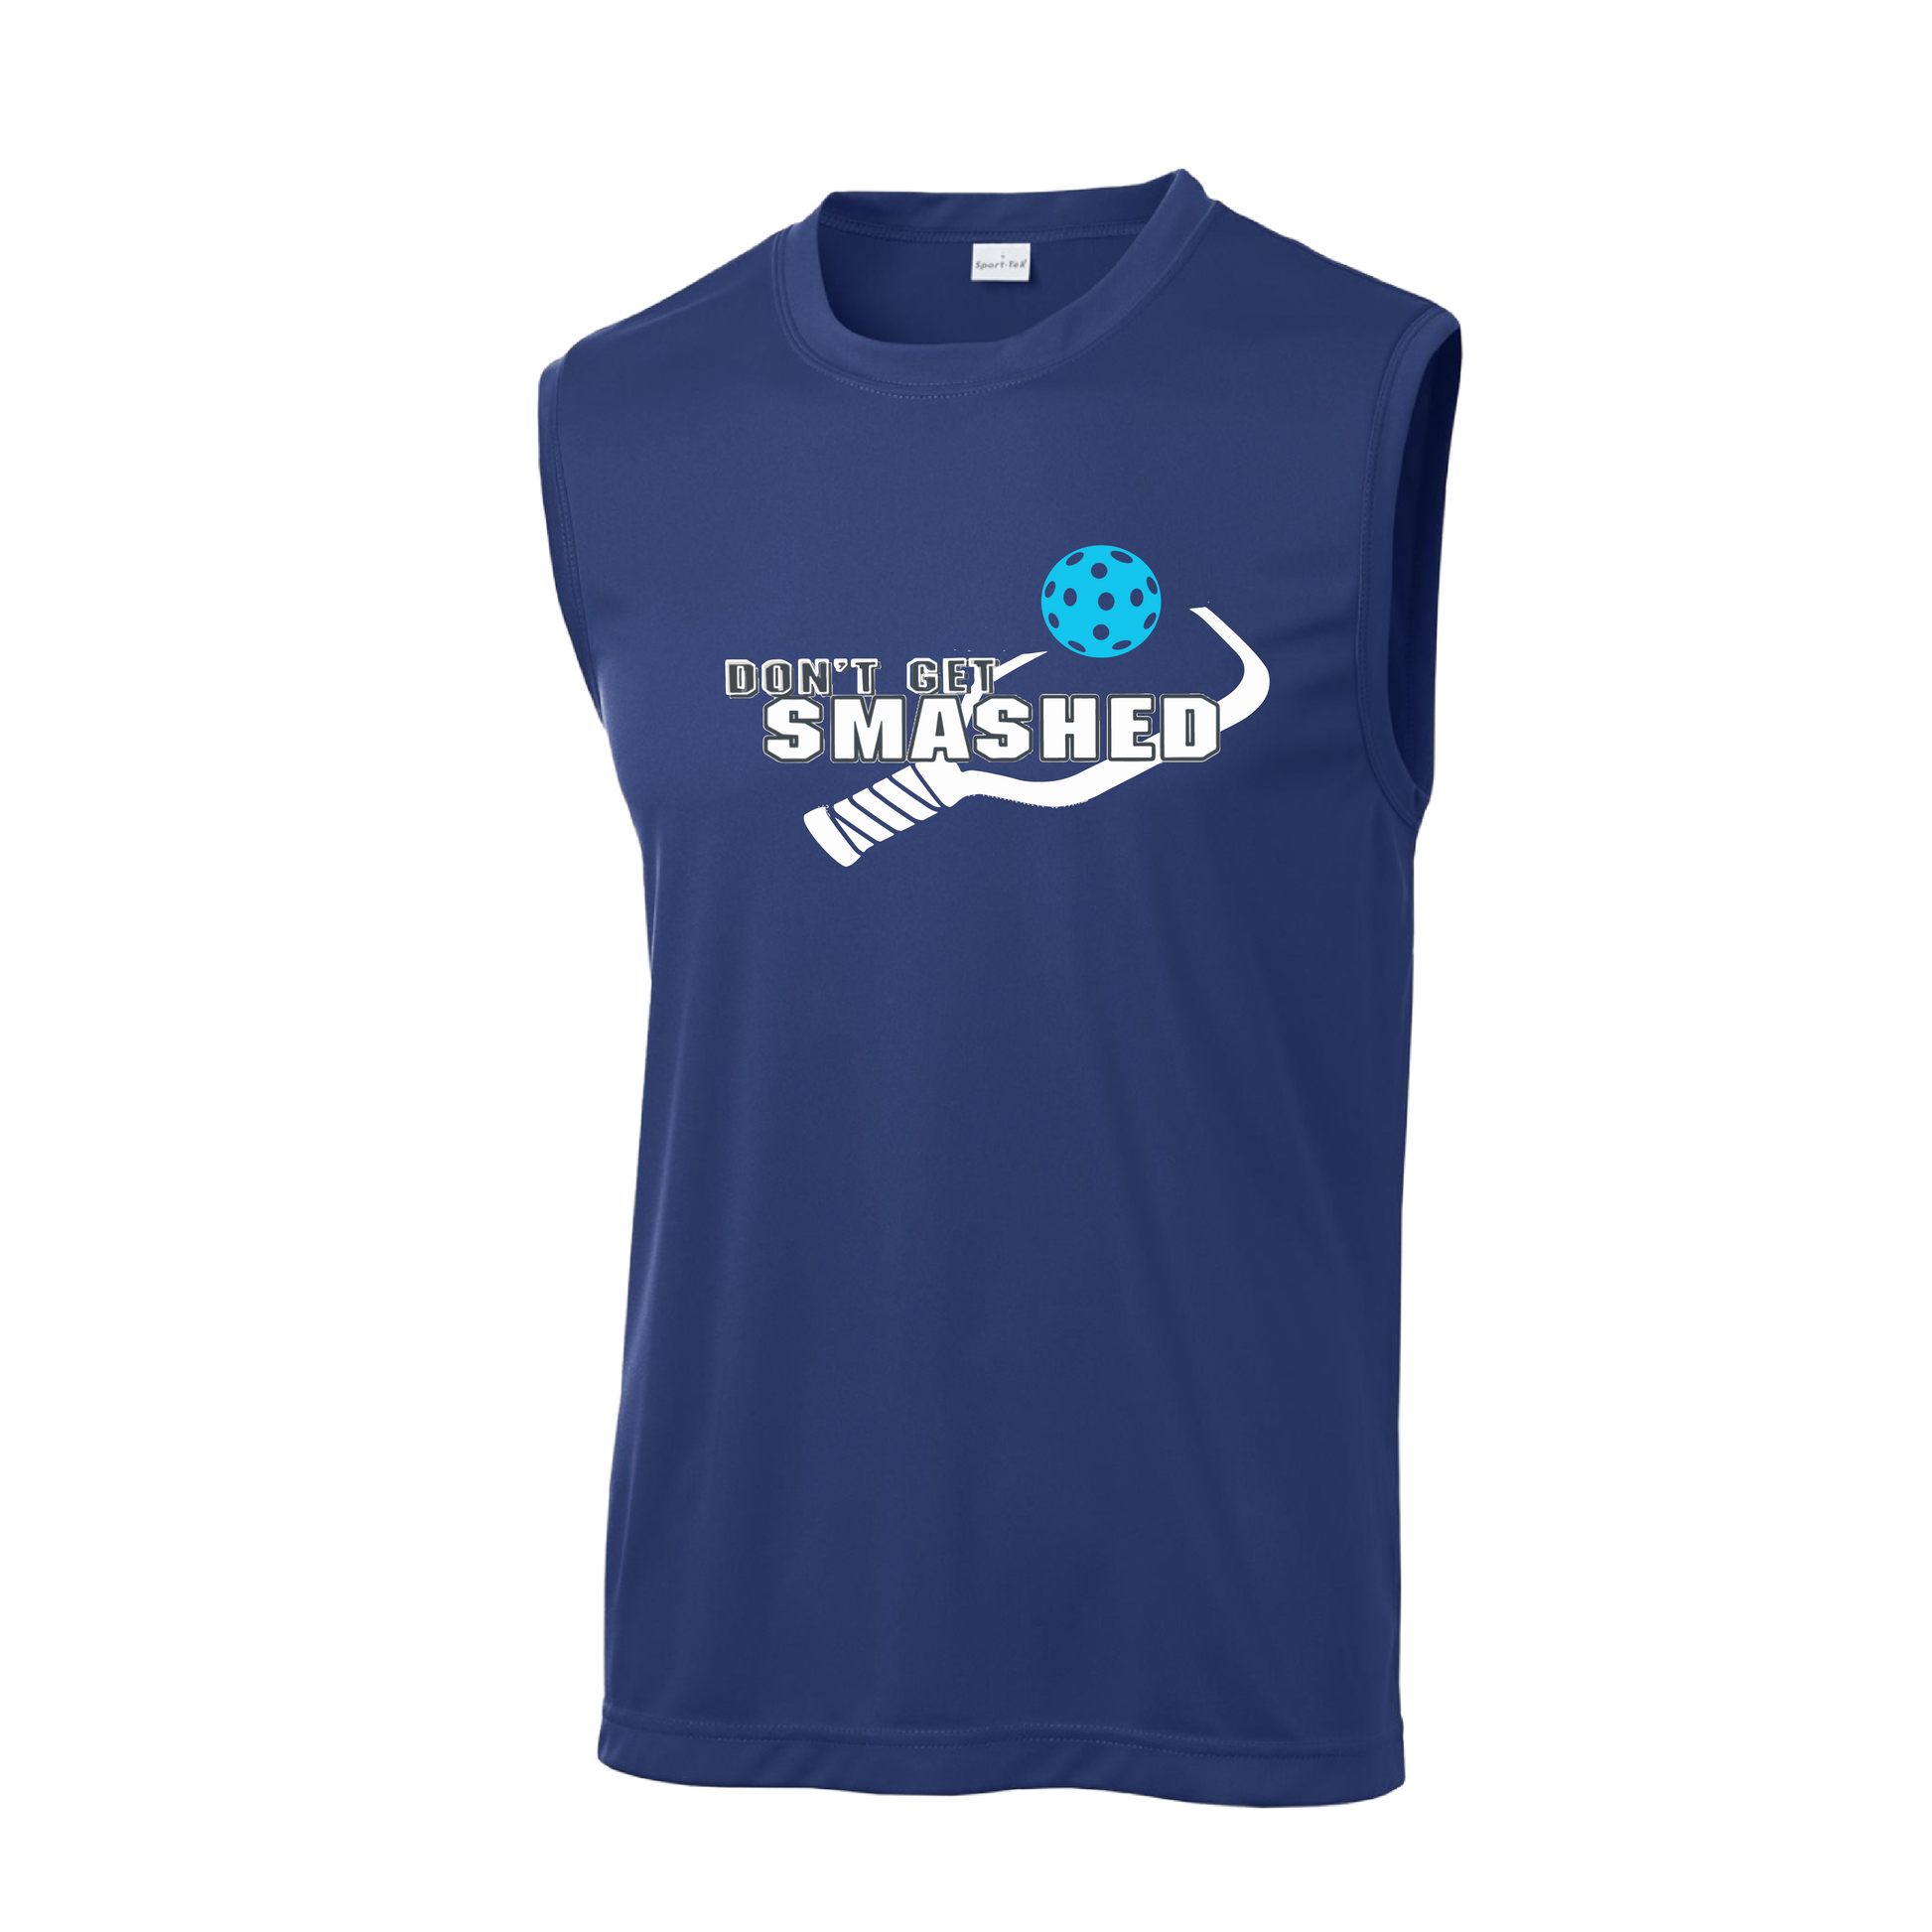 Men's Styles: Sleeveless (SL)  These lightweight, roomy, and highly breathable shirts are a must-have for any athlete! Featuring PosiCharge technology for vibrant colors and logos that won't fade, plus a comfortable removable tag and set-in sleeves - don't miss out on this pickleball shirt!